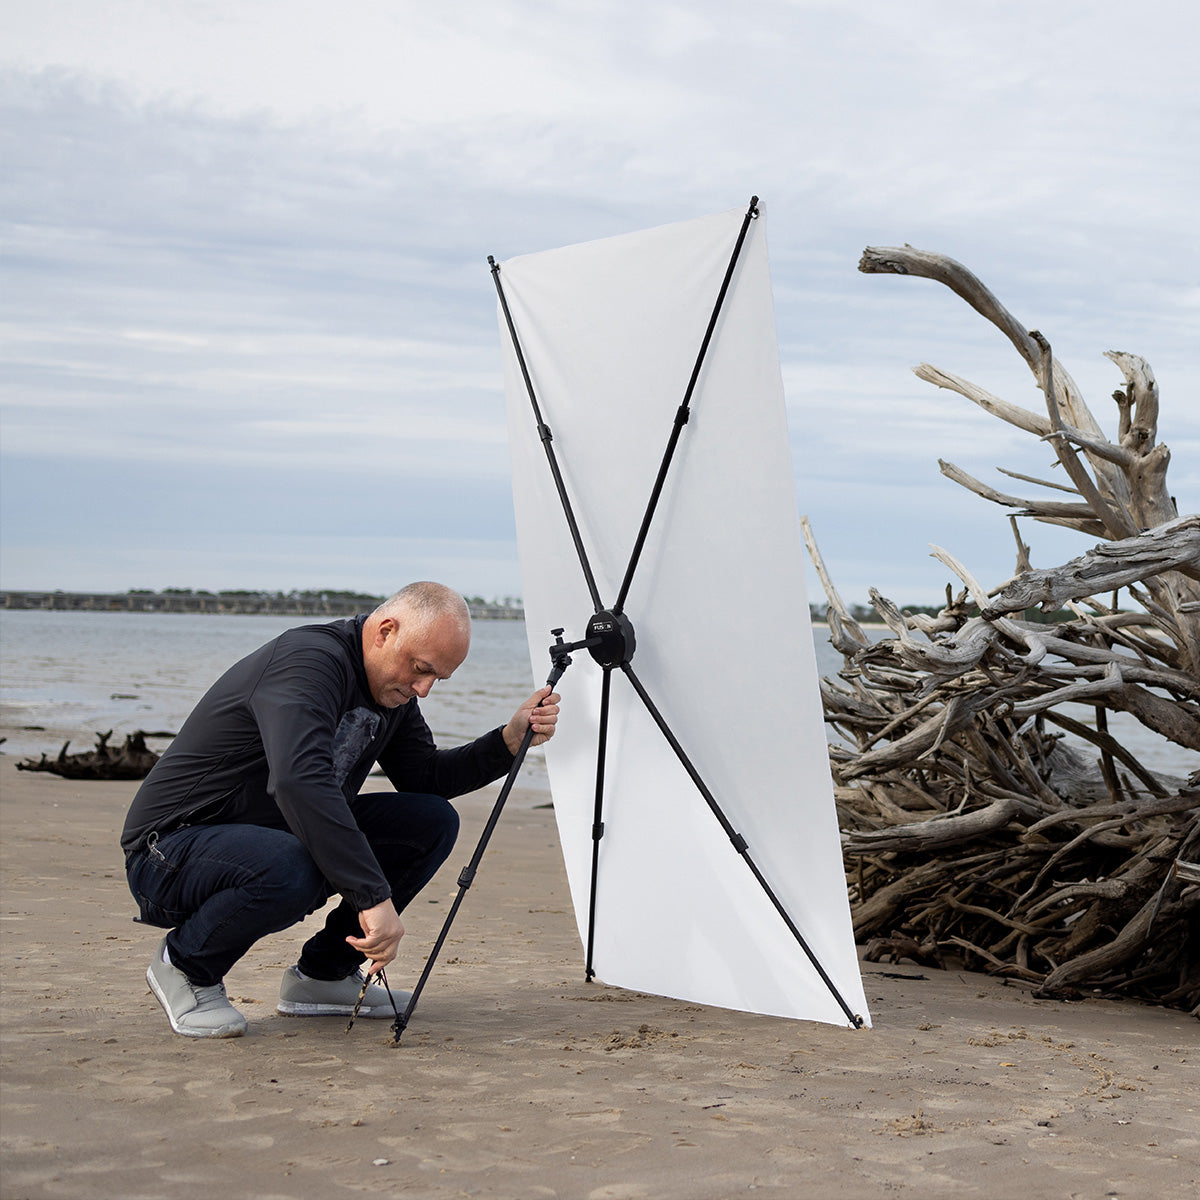 Sal Cincotta setting up the Fusion light control system on a beach using the ground stakes